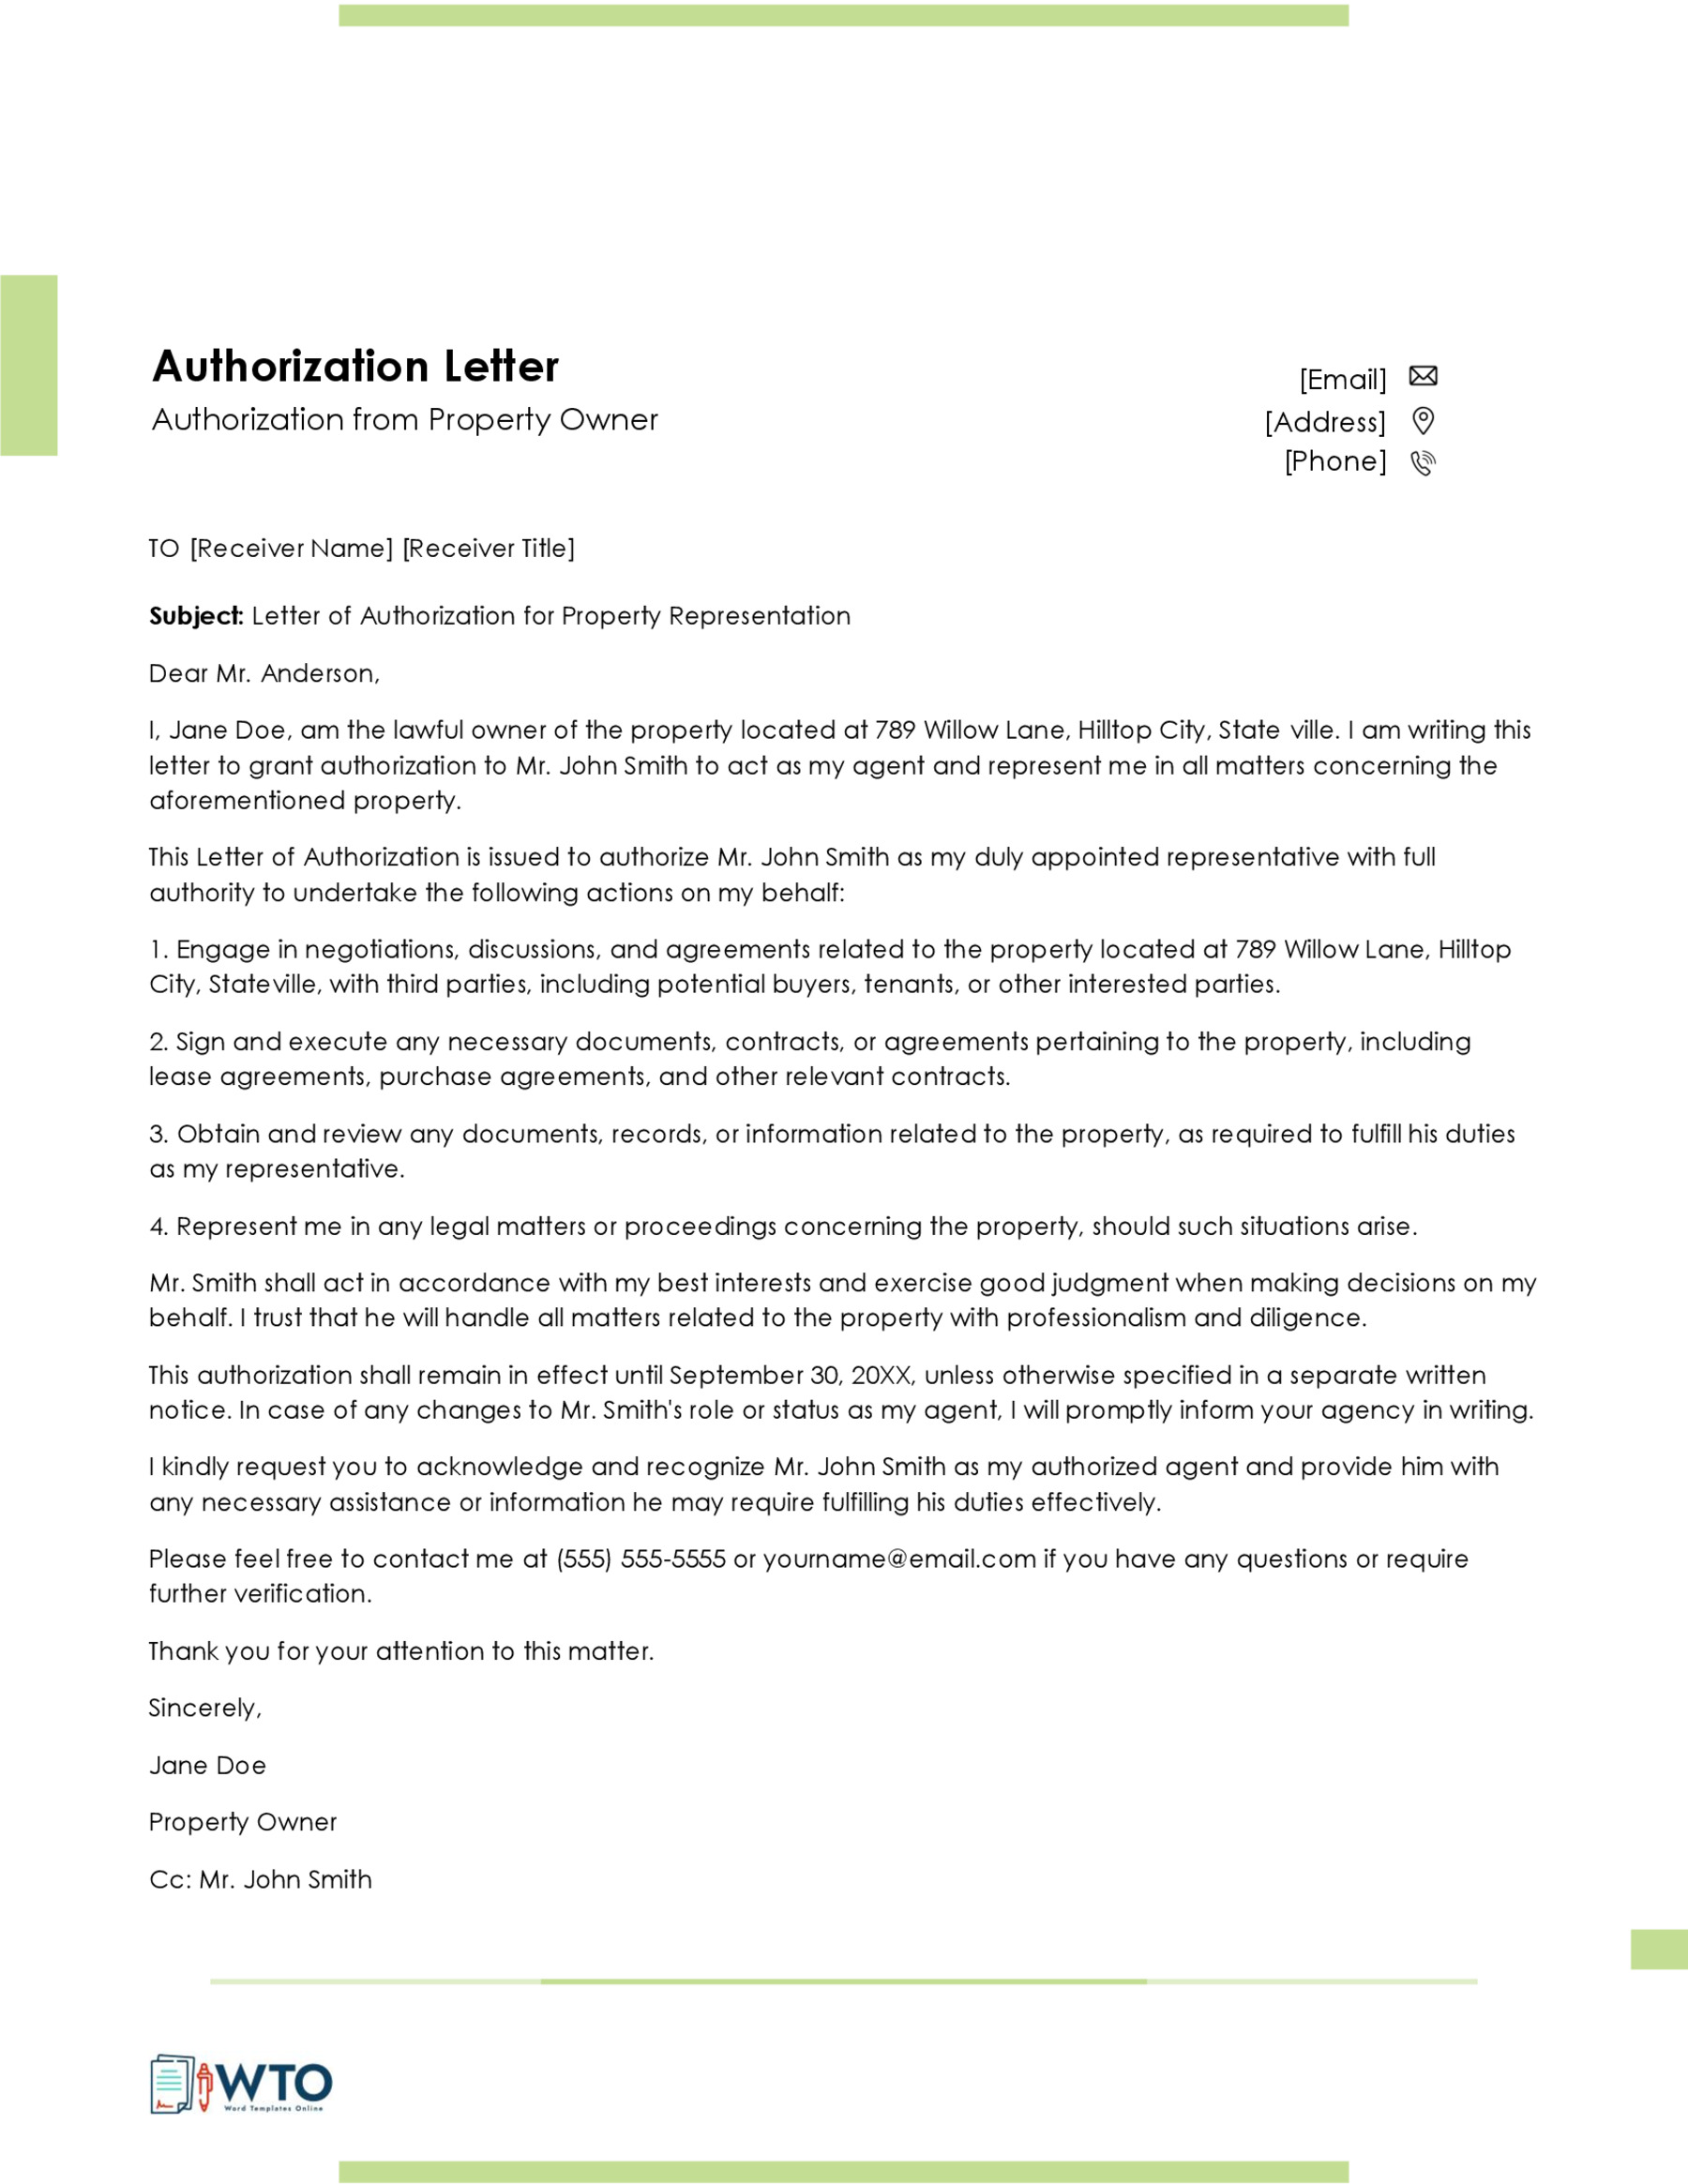 Sample Letter of Authorization from Property Owner-Free Downloadable In Ms Word